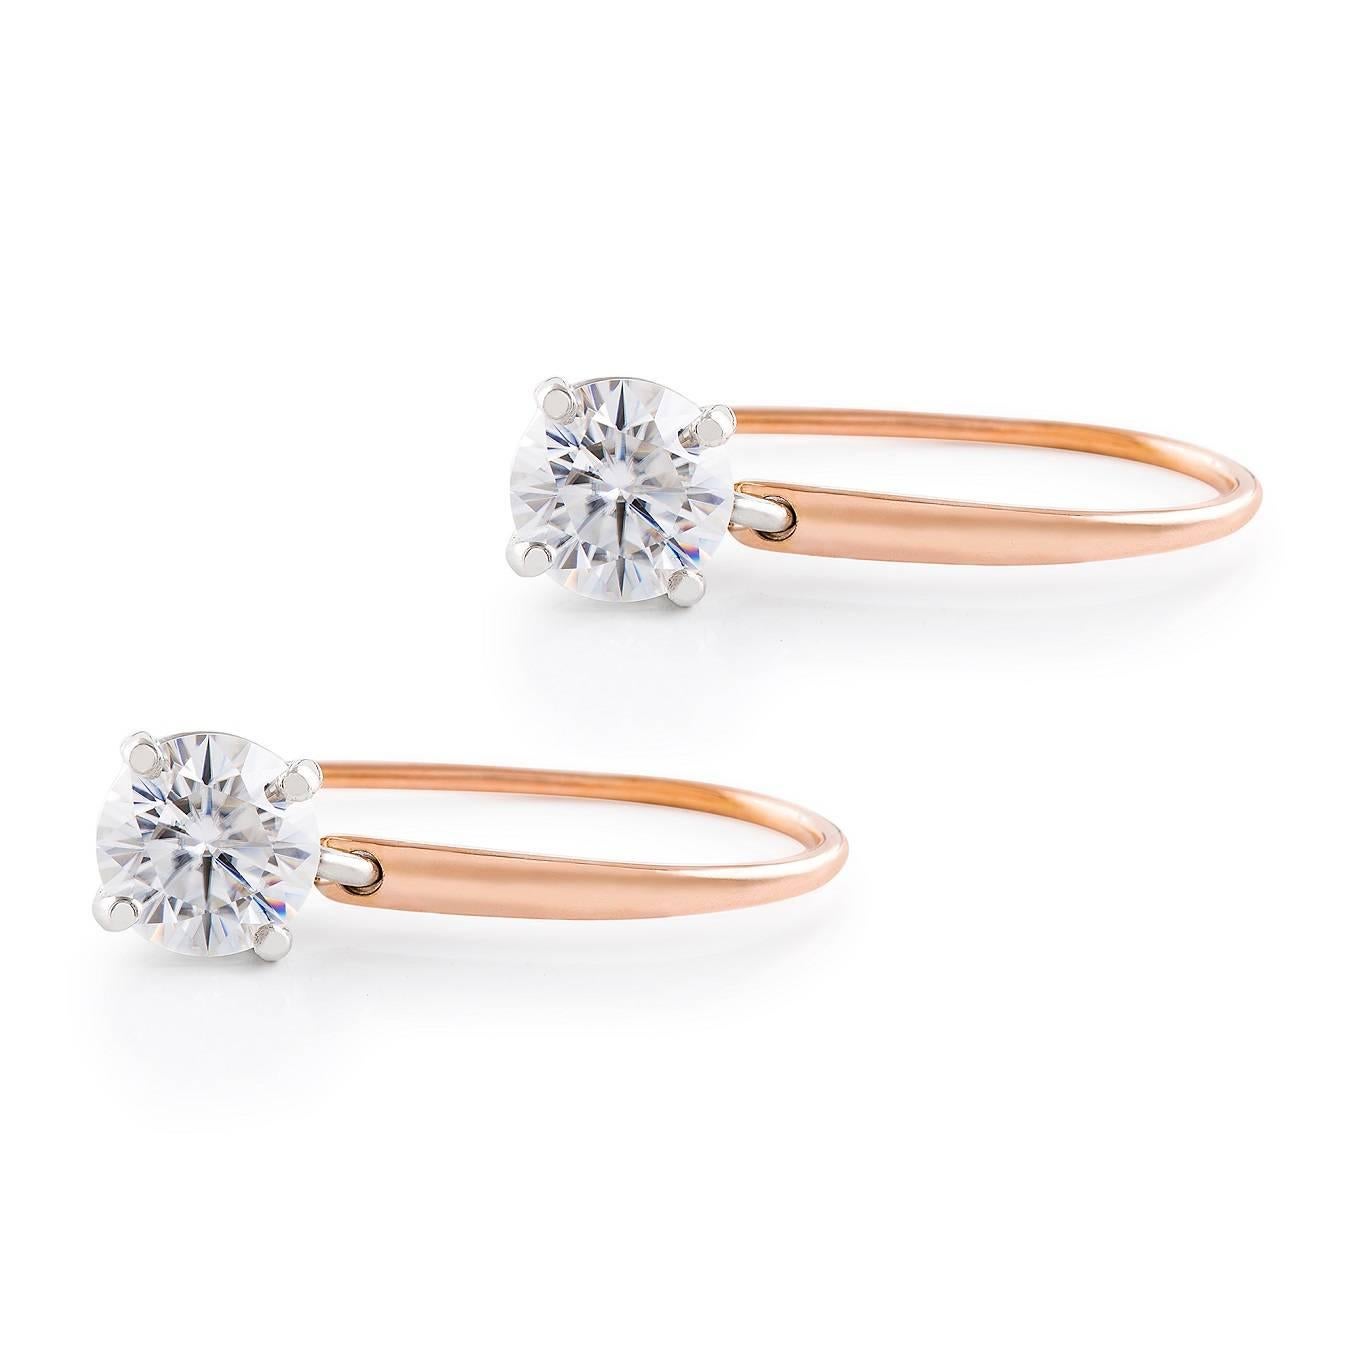 Orecchini con diamanti in oro rosa

Perfect for every occasion, these diamond dangle earrings in platinum and 18 carat rose gold are classics.

Round brilliant cut diamonds: F colour, SI2 clarity, 1.00ct each

Customization: A similar earrings may